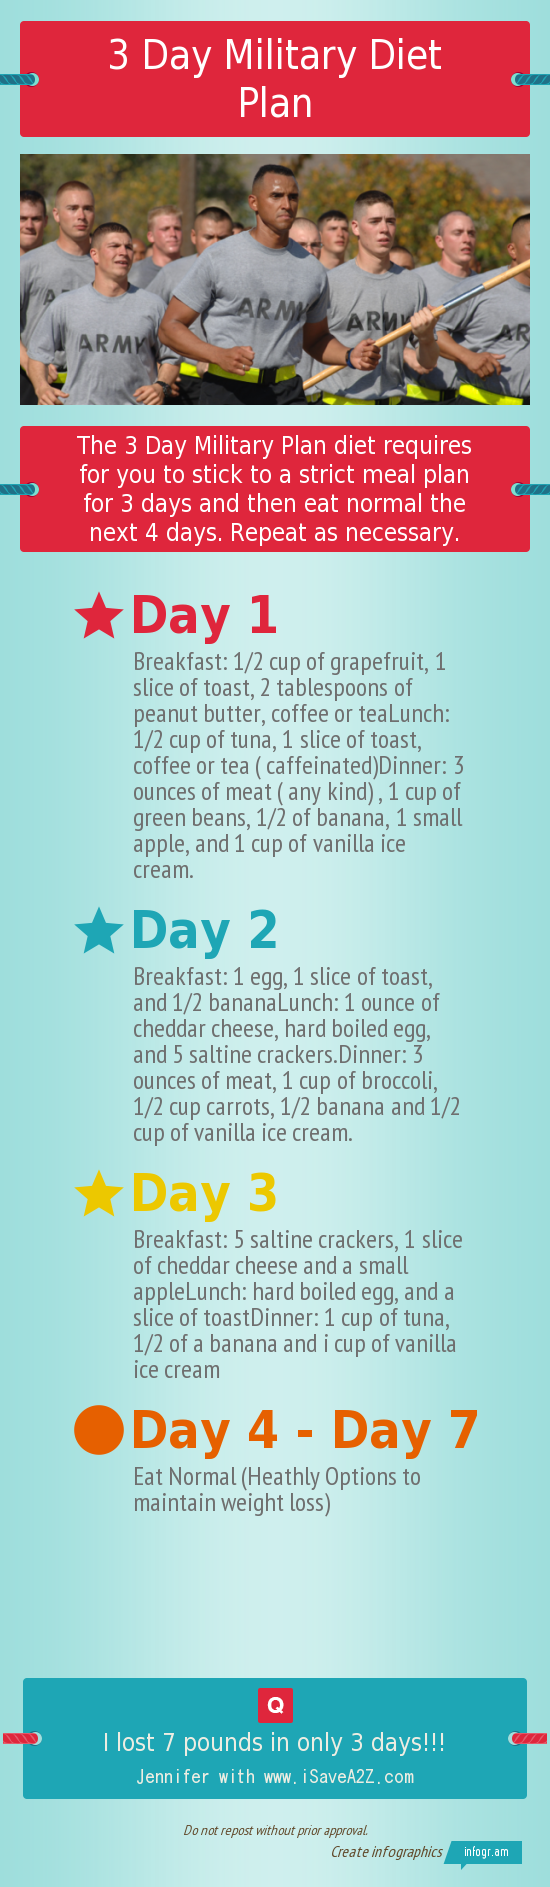 3 day military diet plan! i love 7.5 pounds fast!